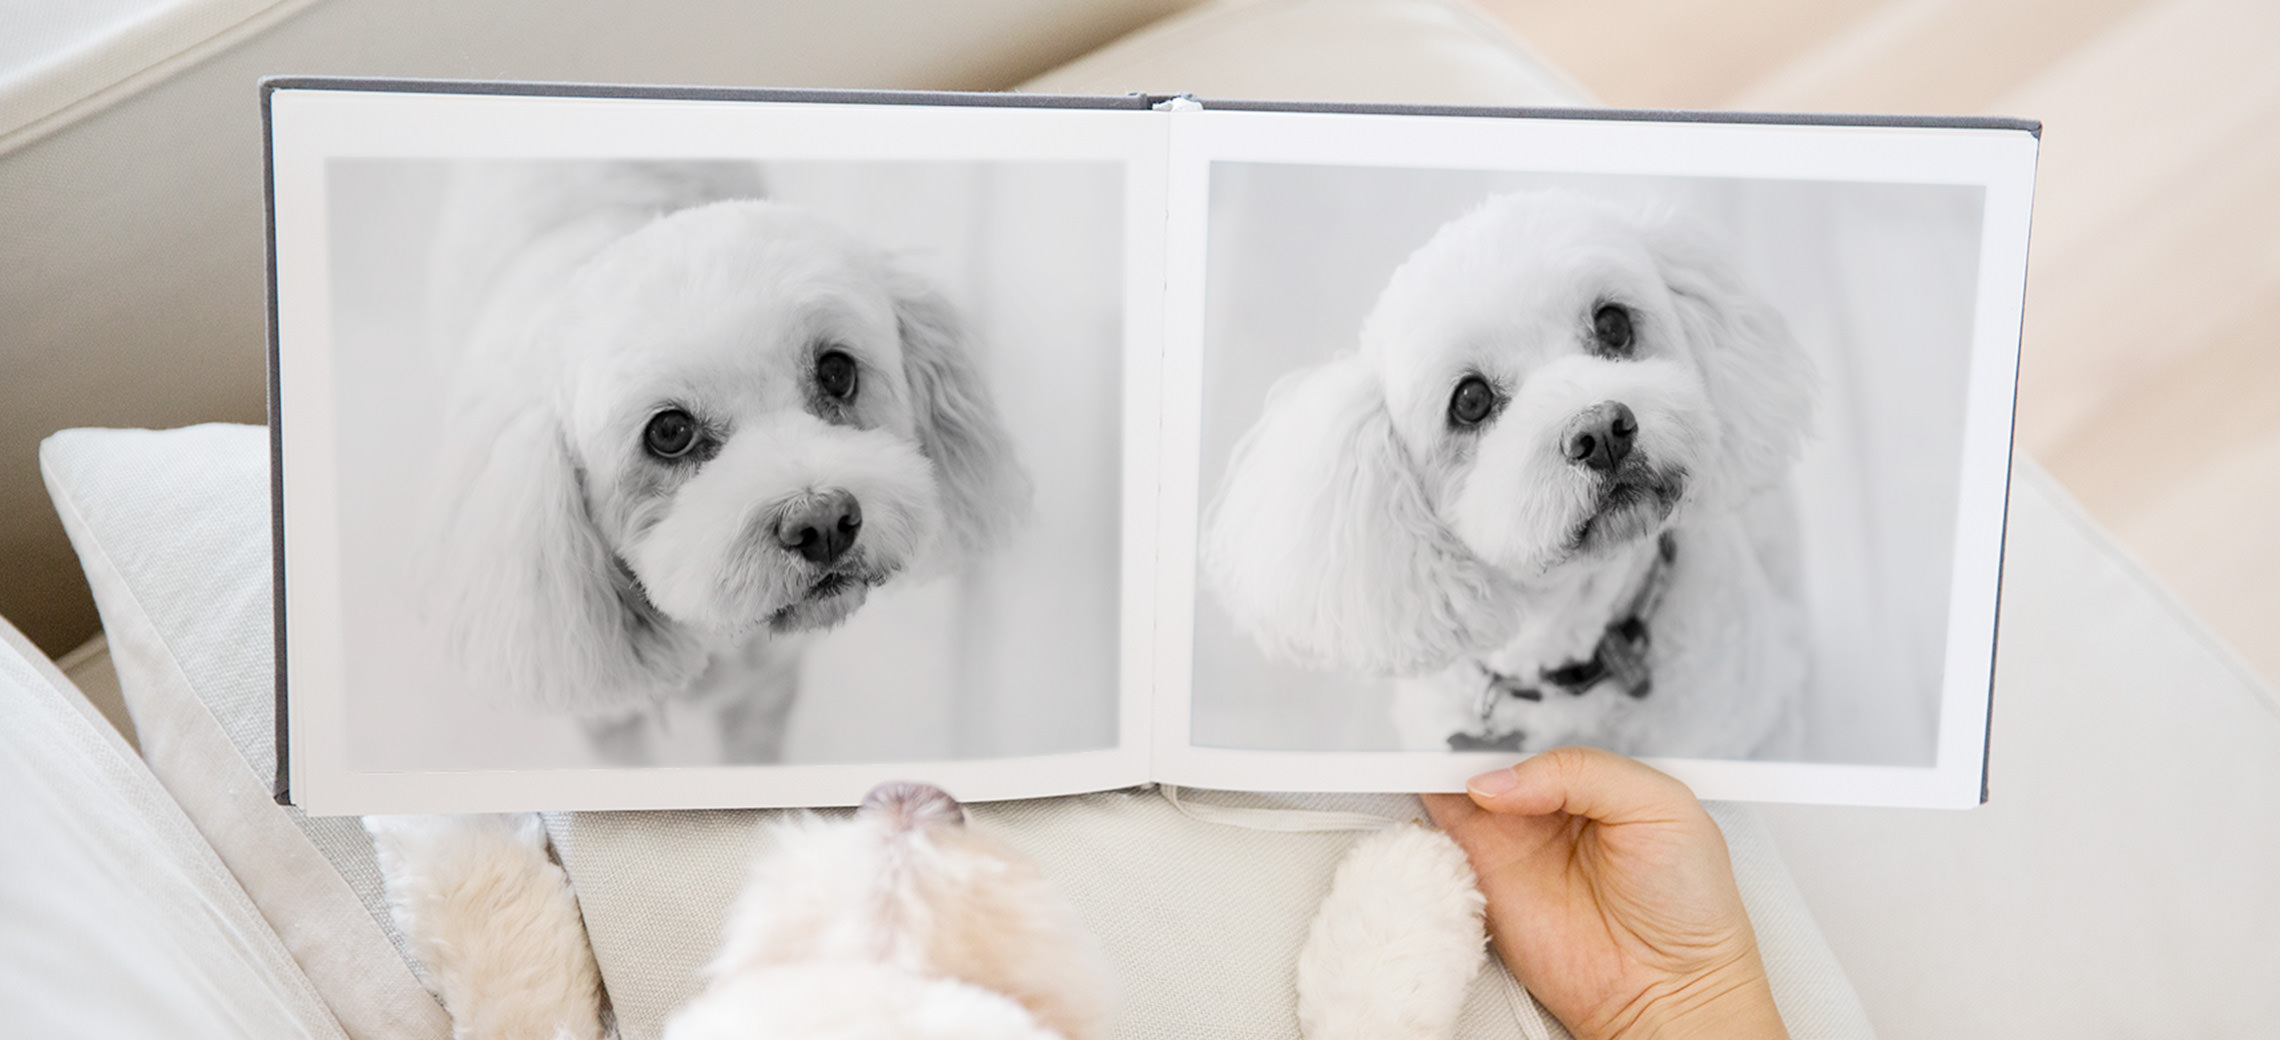 Person looking at photo book with images of a white dog.